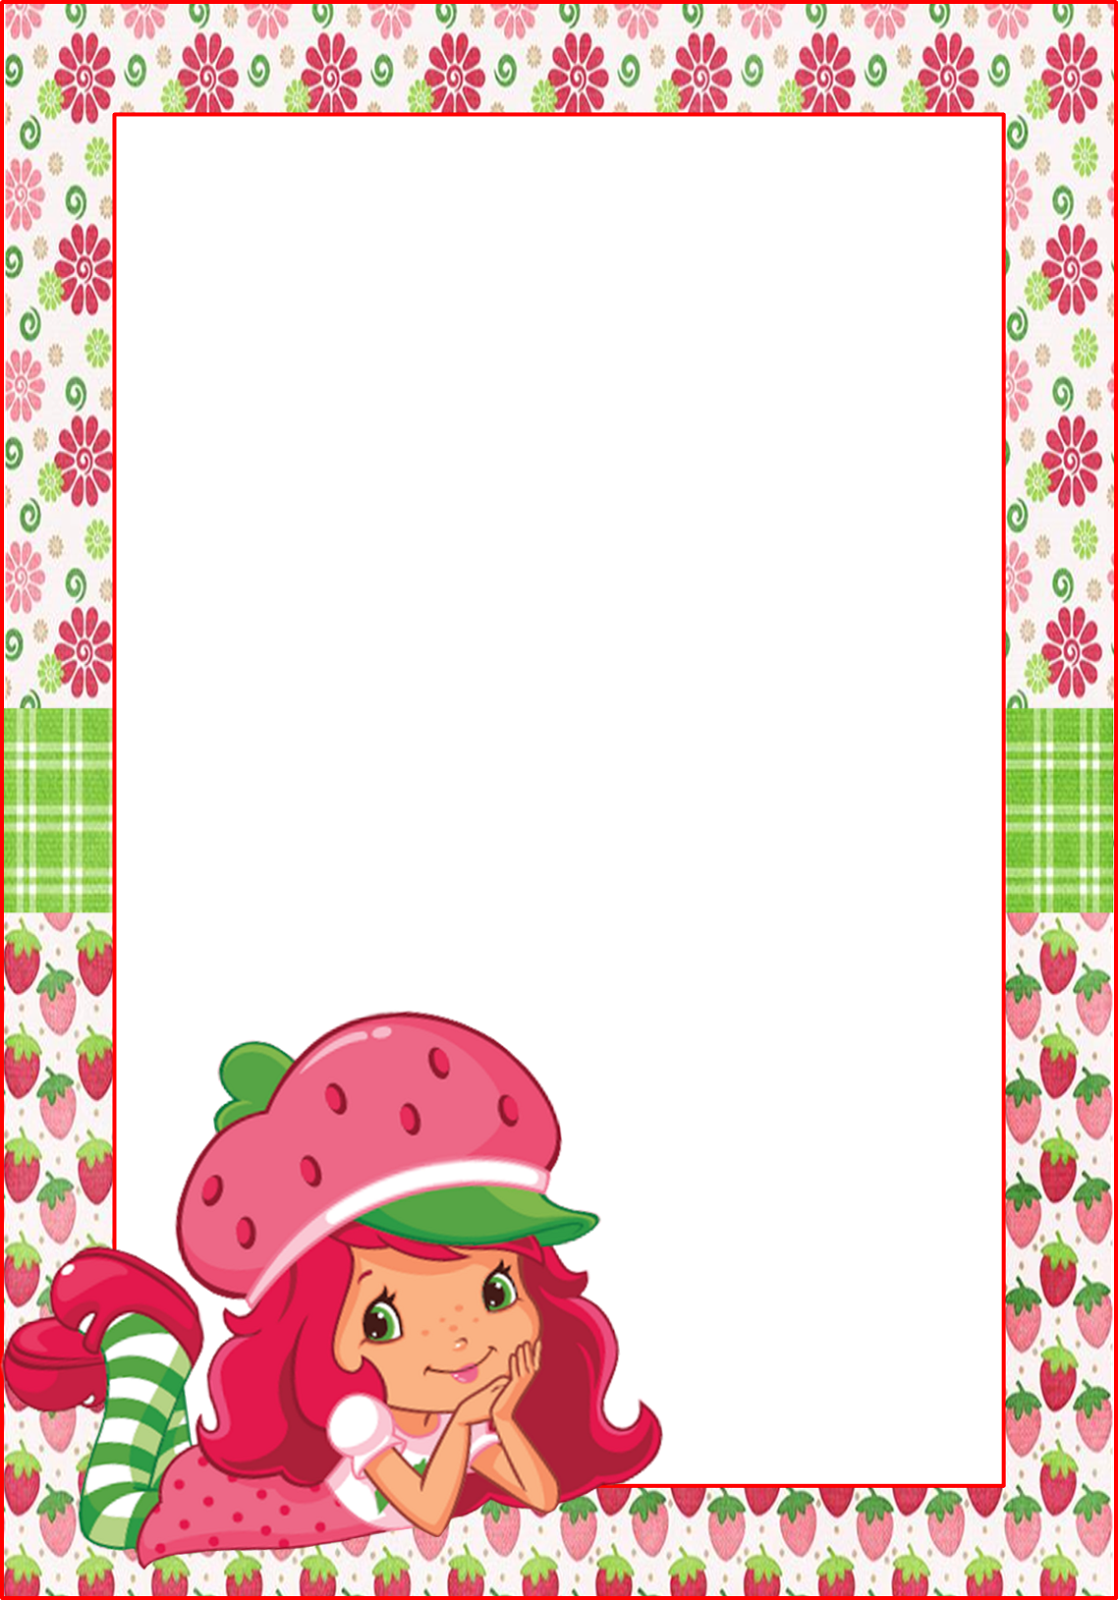 strawberry-shortcake-free-printable-frames-invitations-or-cards-oh